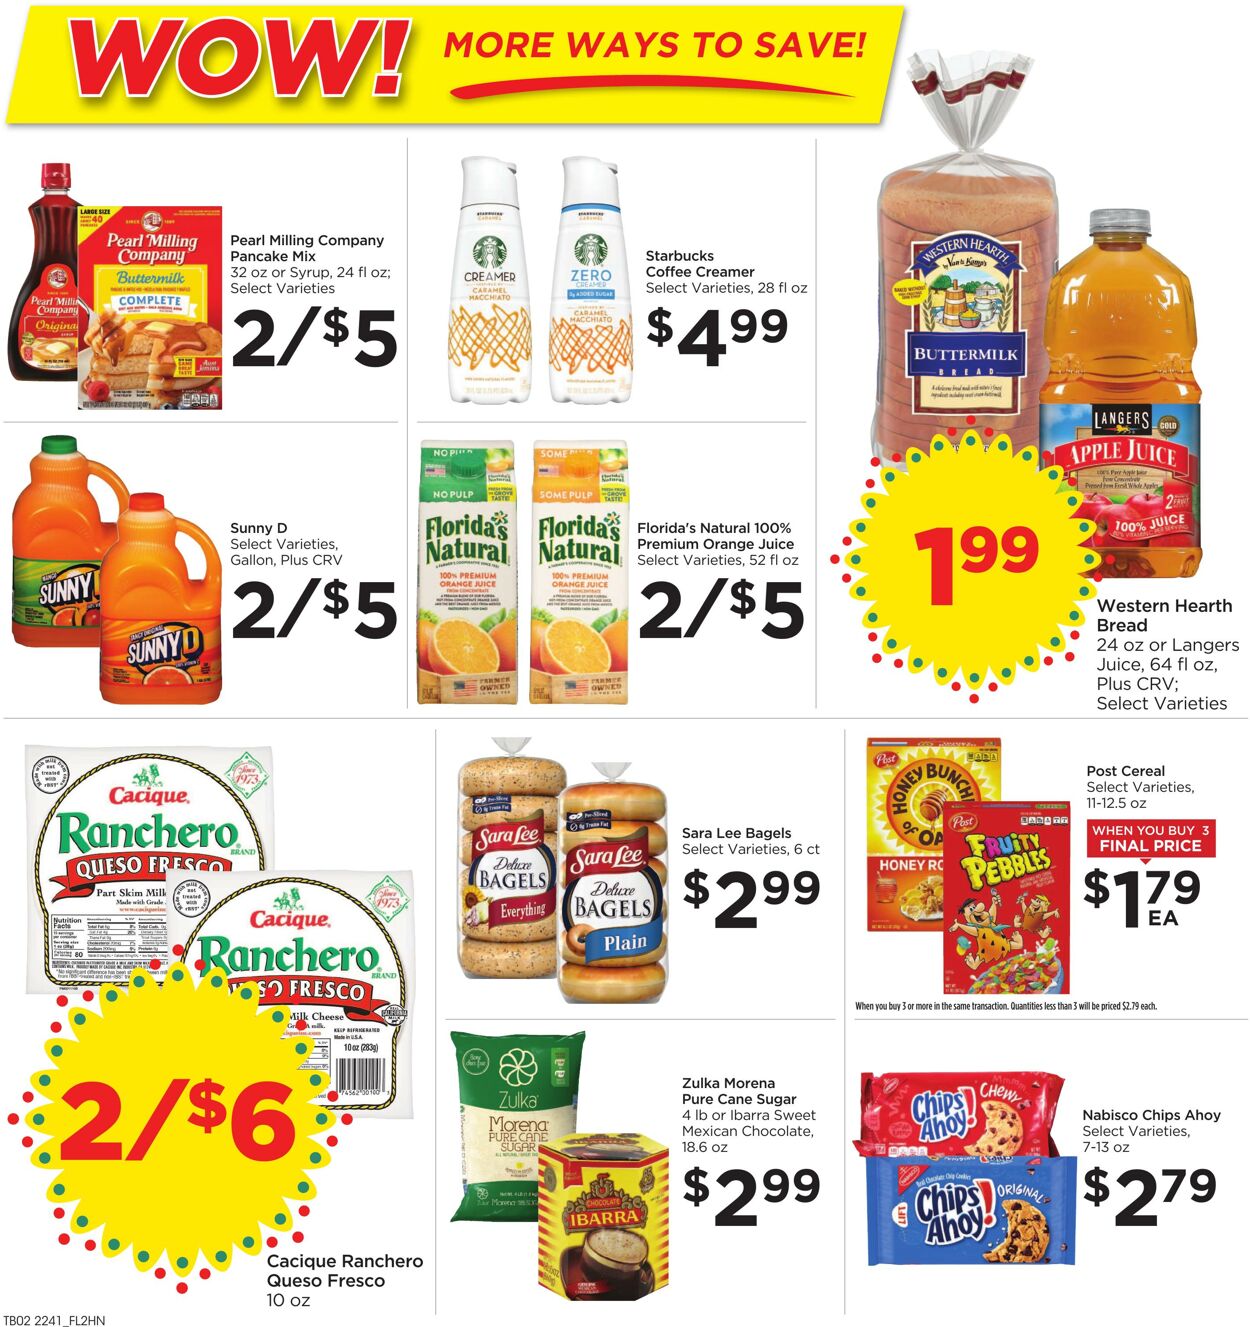 Weekly ad Foods Co 11/09/2022 - 11/15/2022